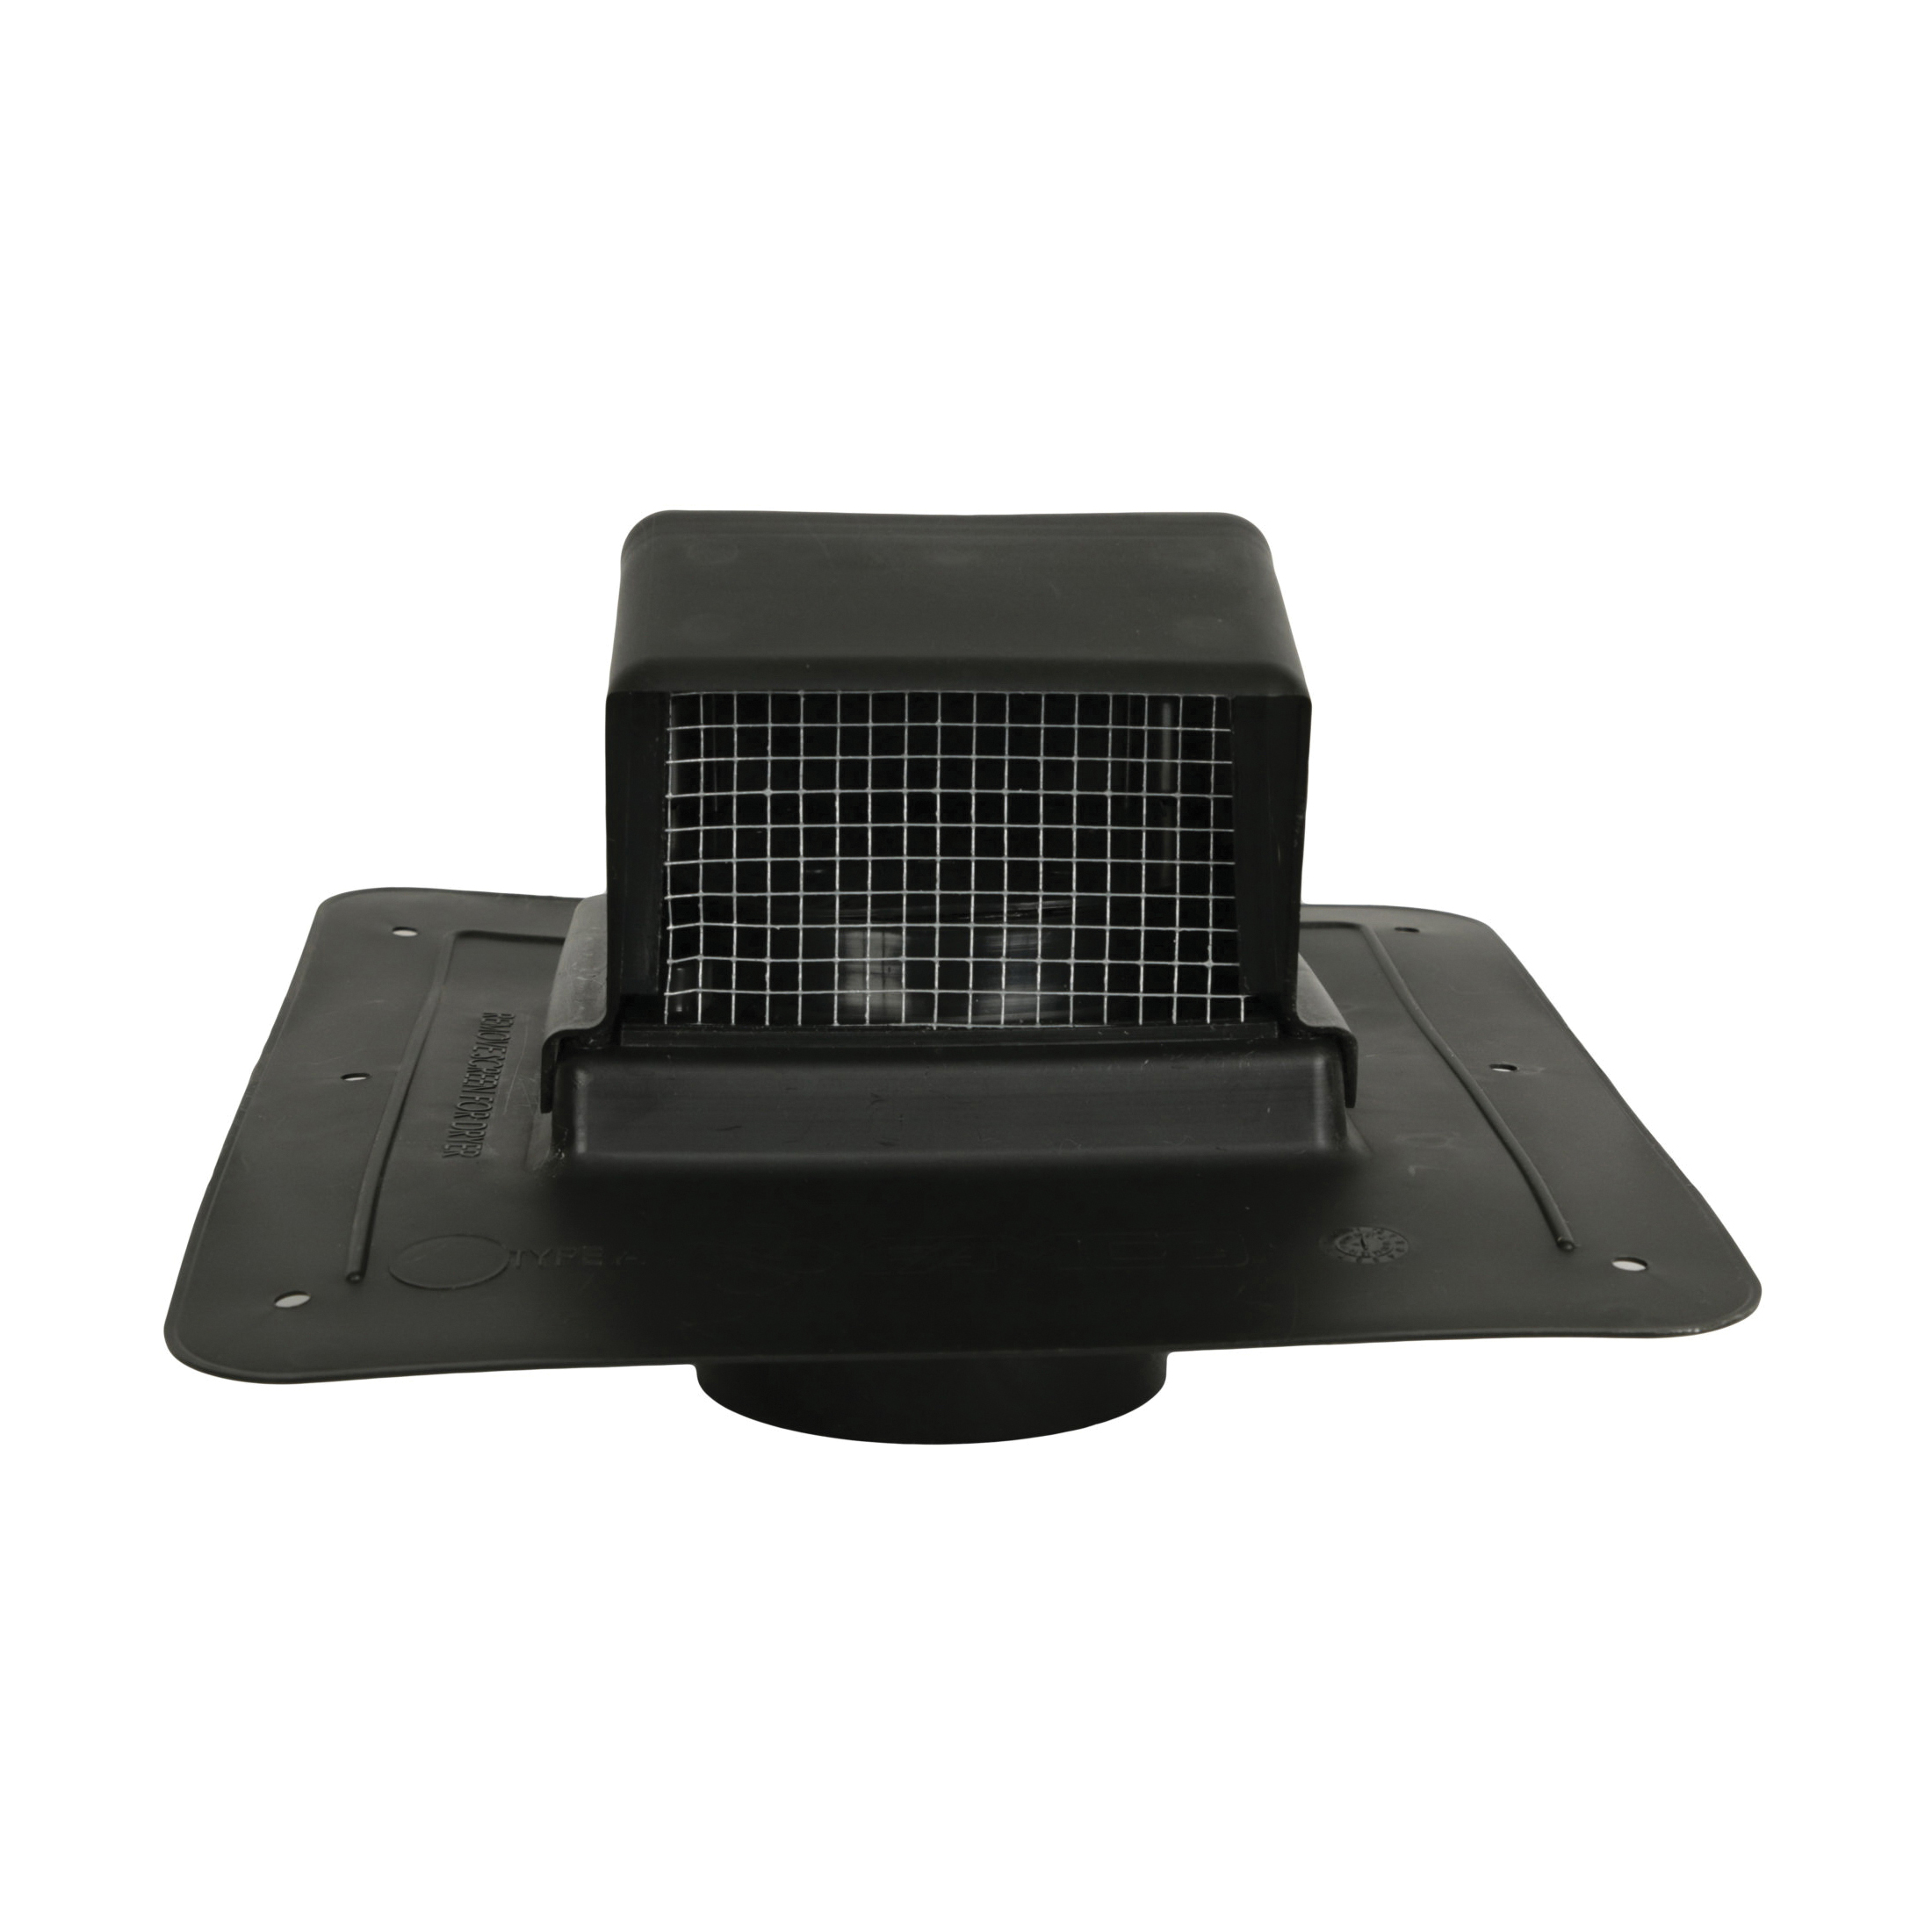 Famco BVDS4BKNS Roof Vent With Stem, 4 in, HDPE, 12-3/4 in W